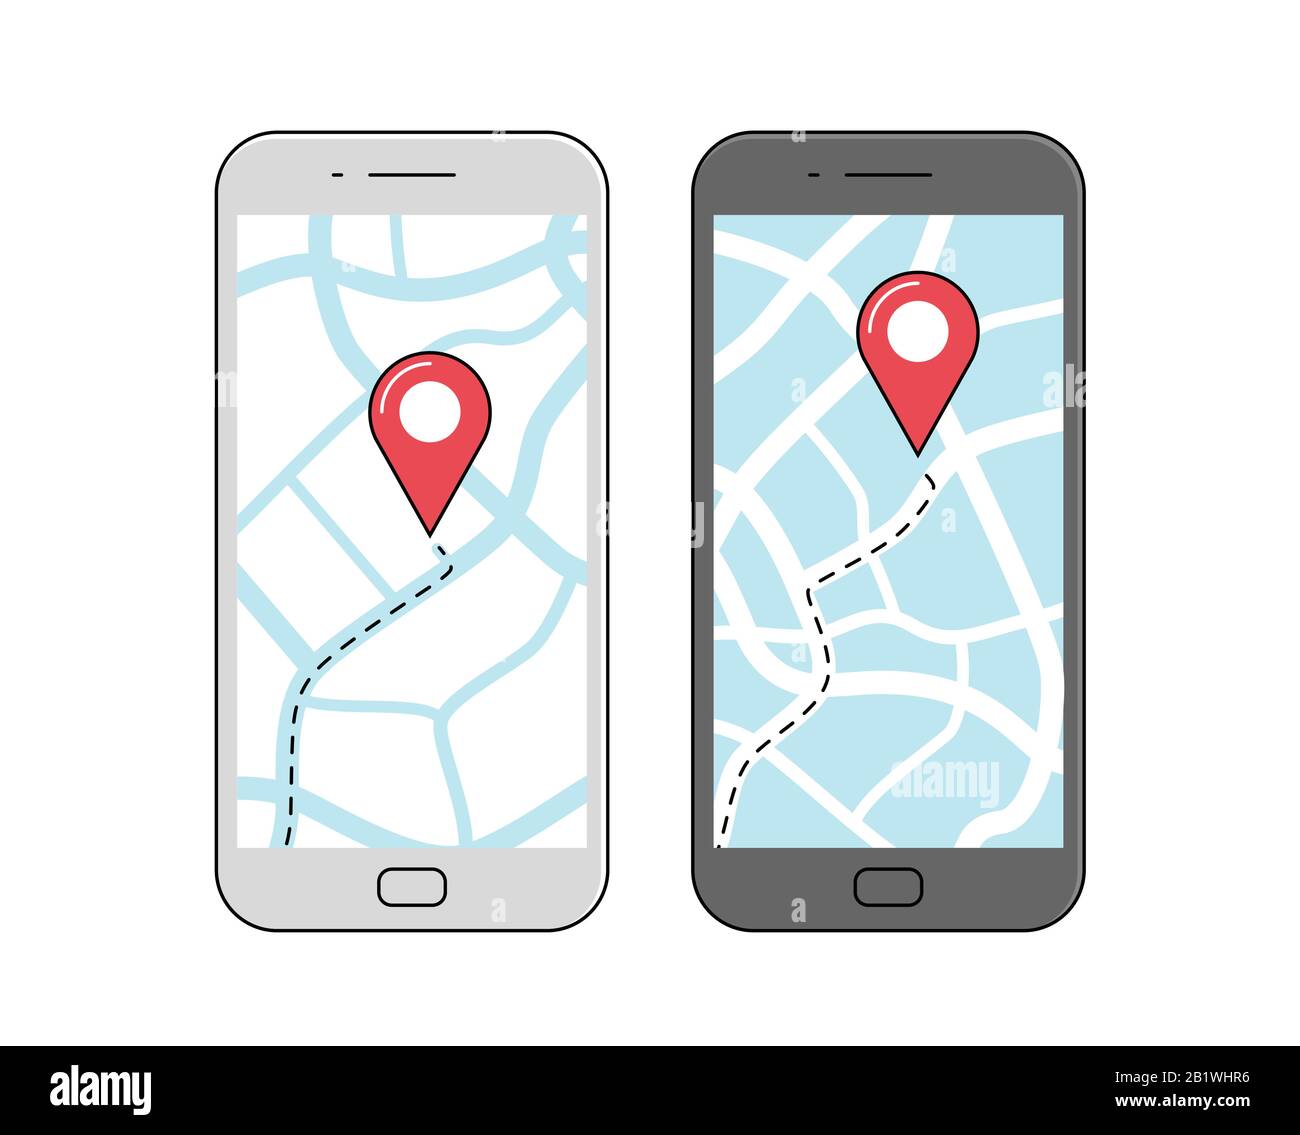 GPS navigation on screen of mobile phone. Vector illustration Stock Vector